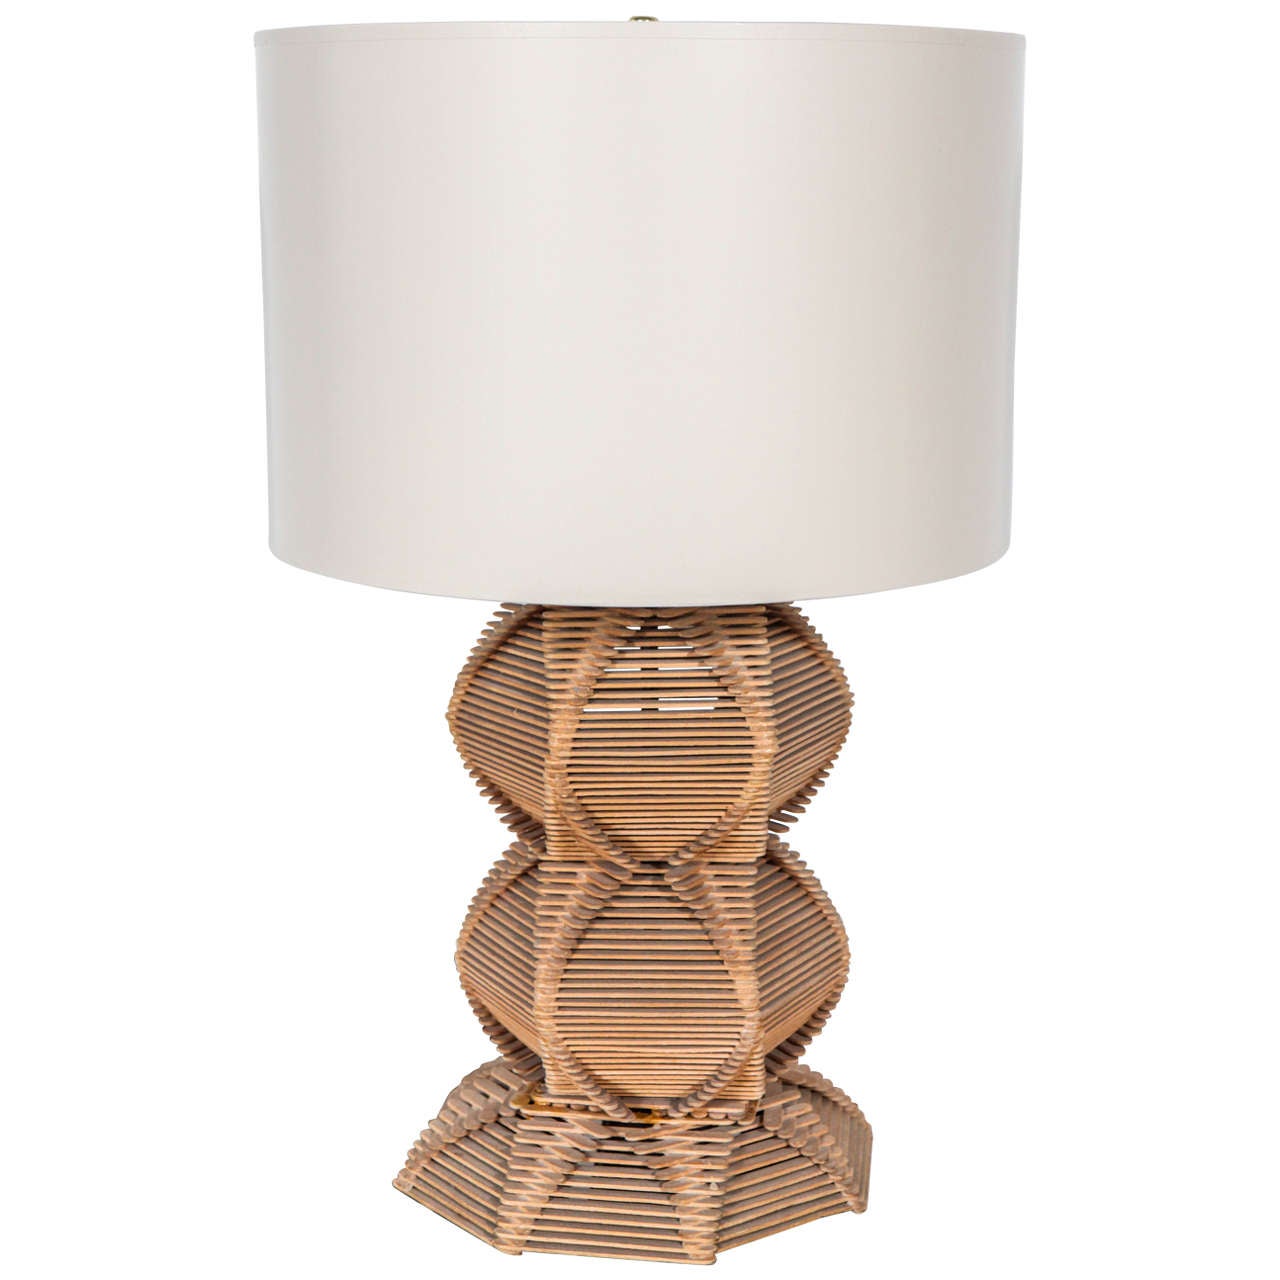 Tramp Style Stacked Popsicle Stick Table Lamp